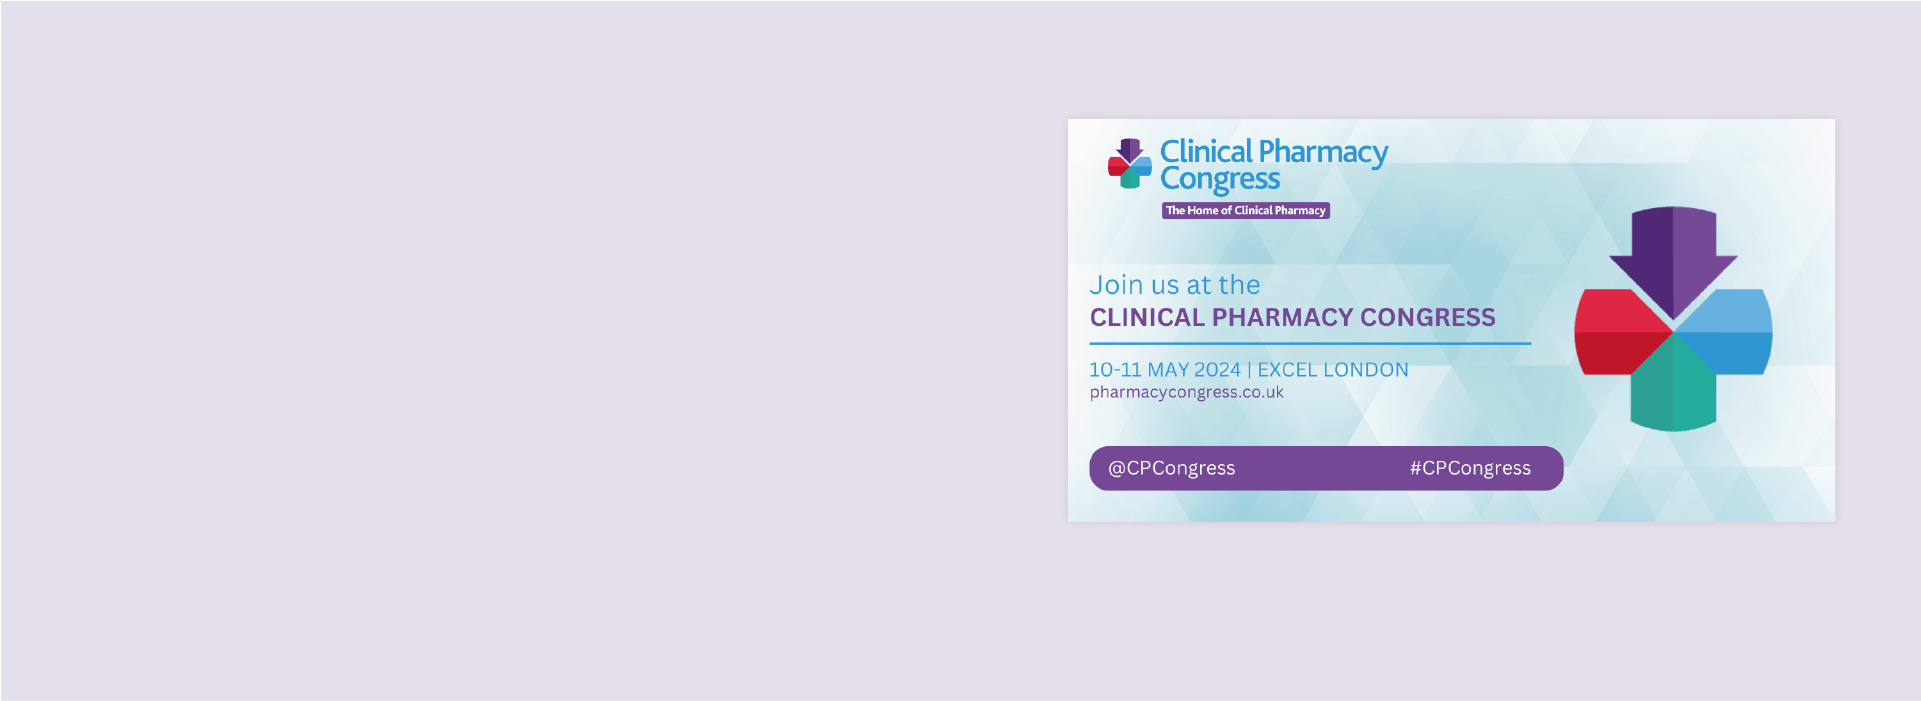 Details of the Clinical Pharmacy congress